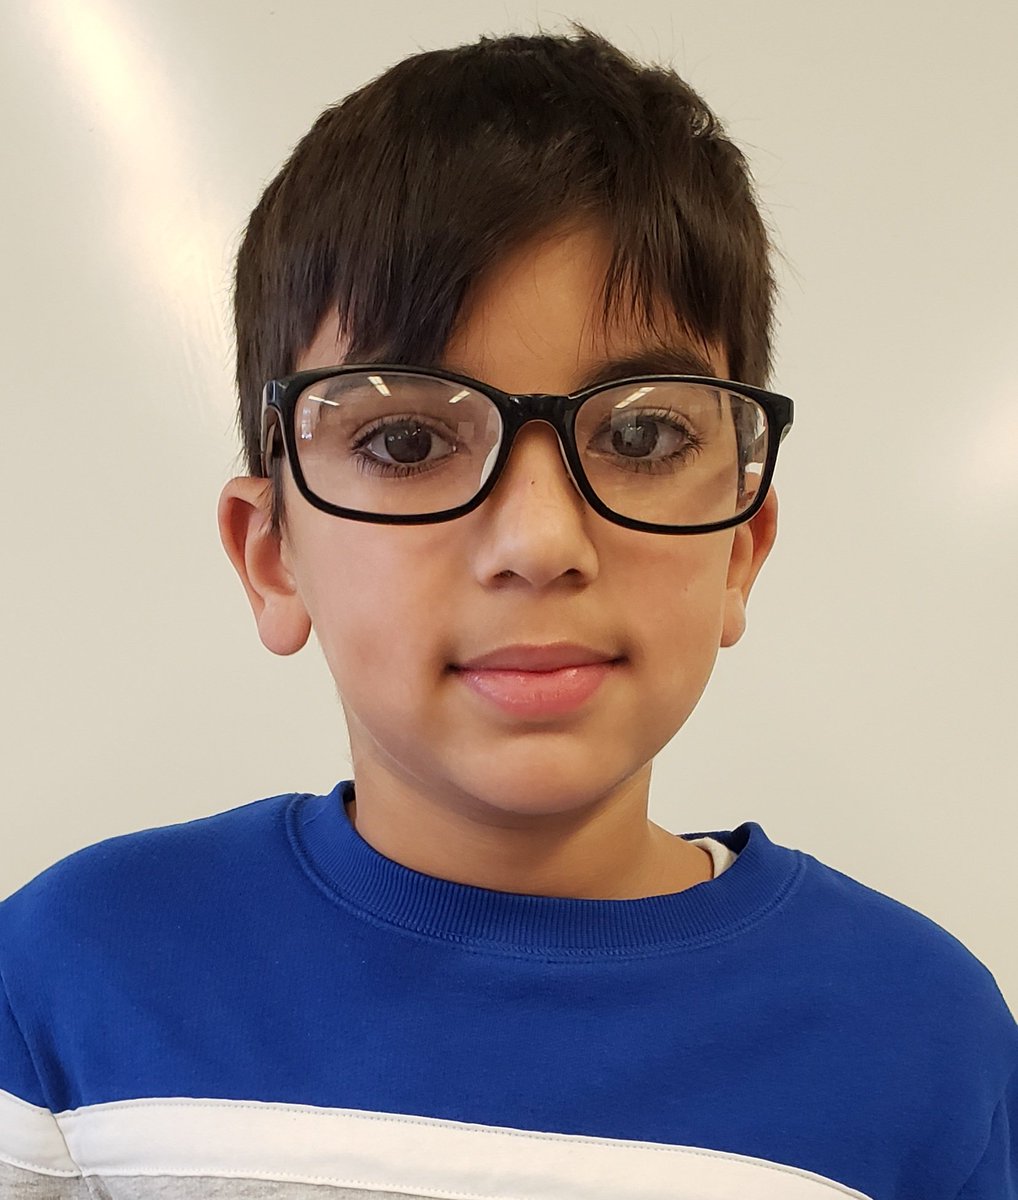 And then there were 52 ... Congratulations to Muteeb for being inducted into the Wedgwood School @FirstInMath Wall of Fame for earning more than 10,000 stickers. Muteeb is a 2nd grade student in Mrs. Woodward's class. Way to go!! @wedgwoodwtps